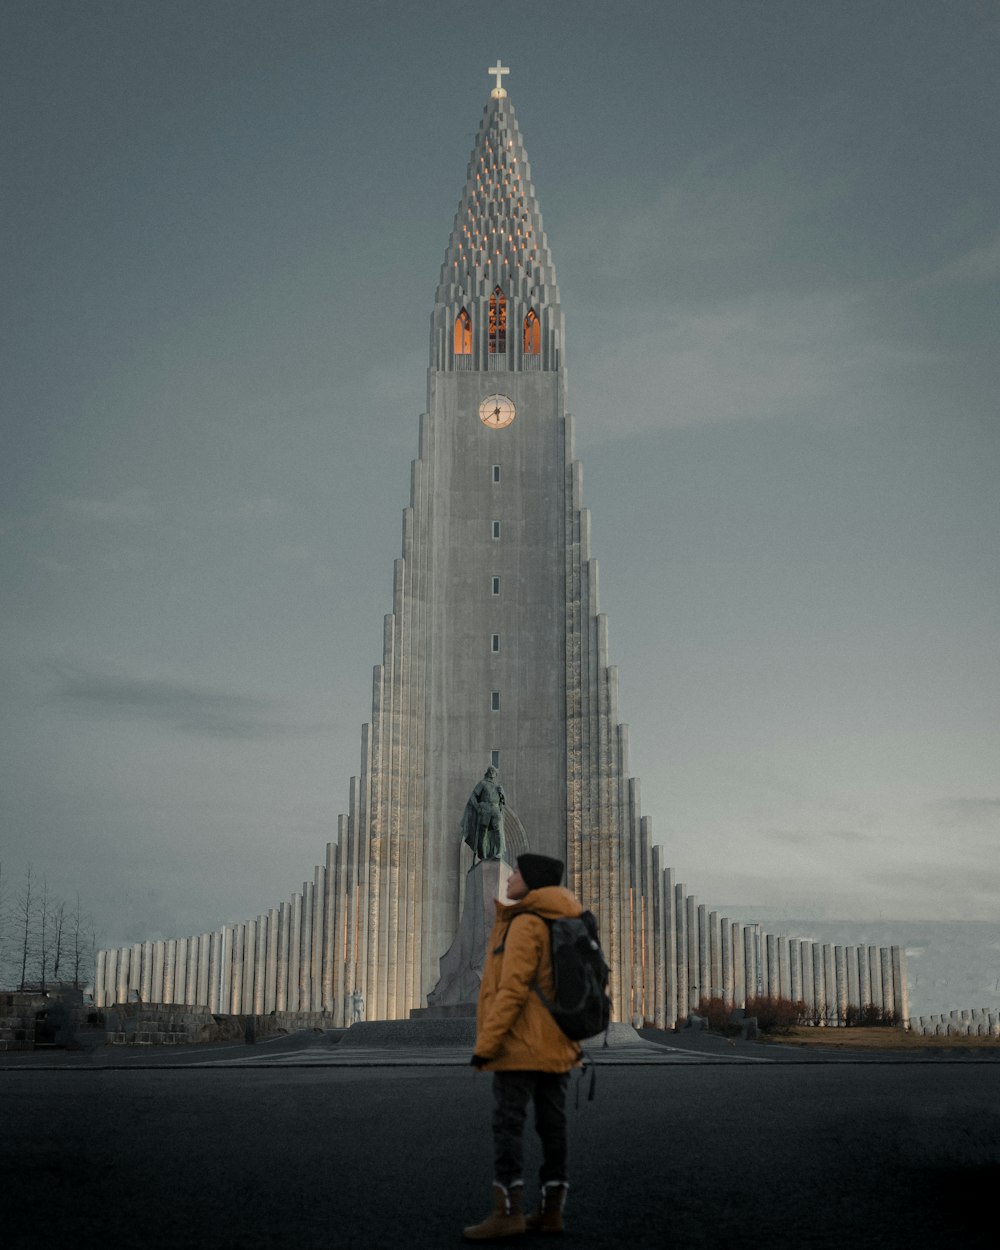 a person standing in front of a tall building with Hallgrímskirkja in the background